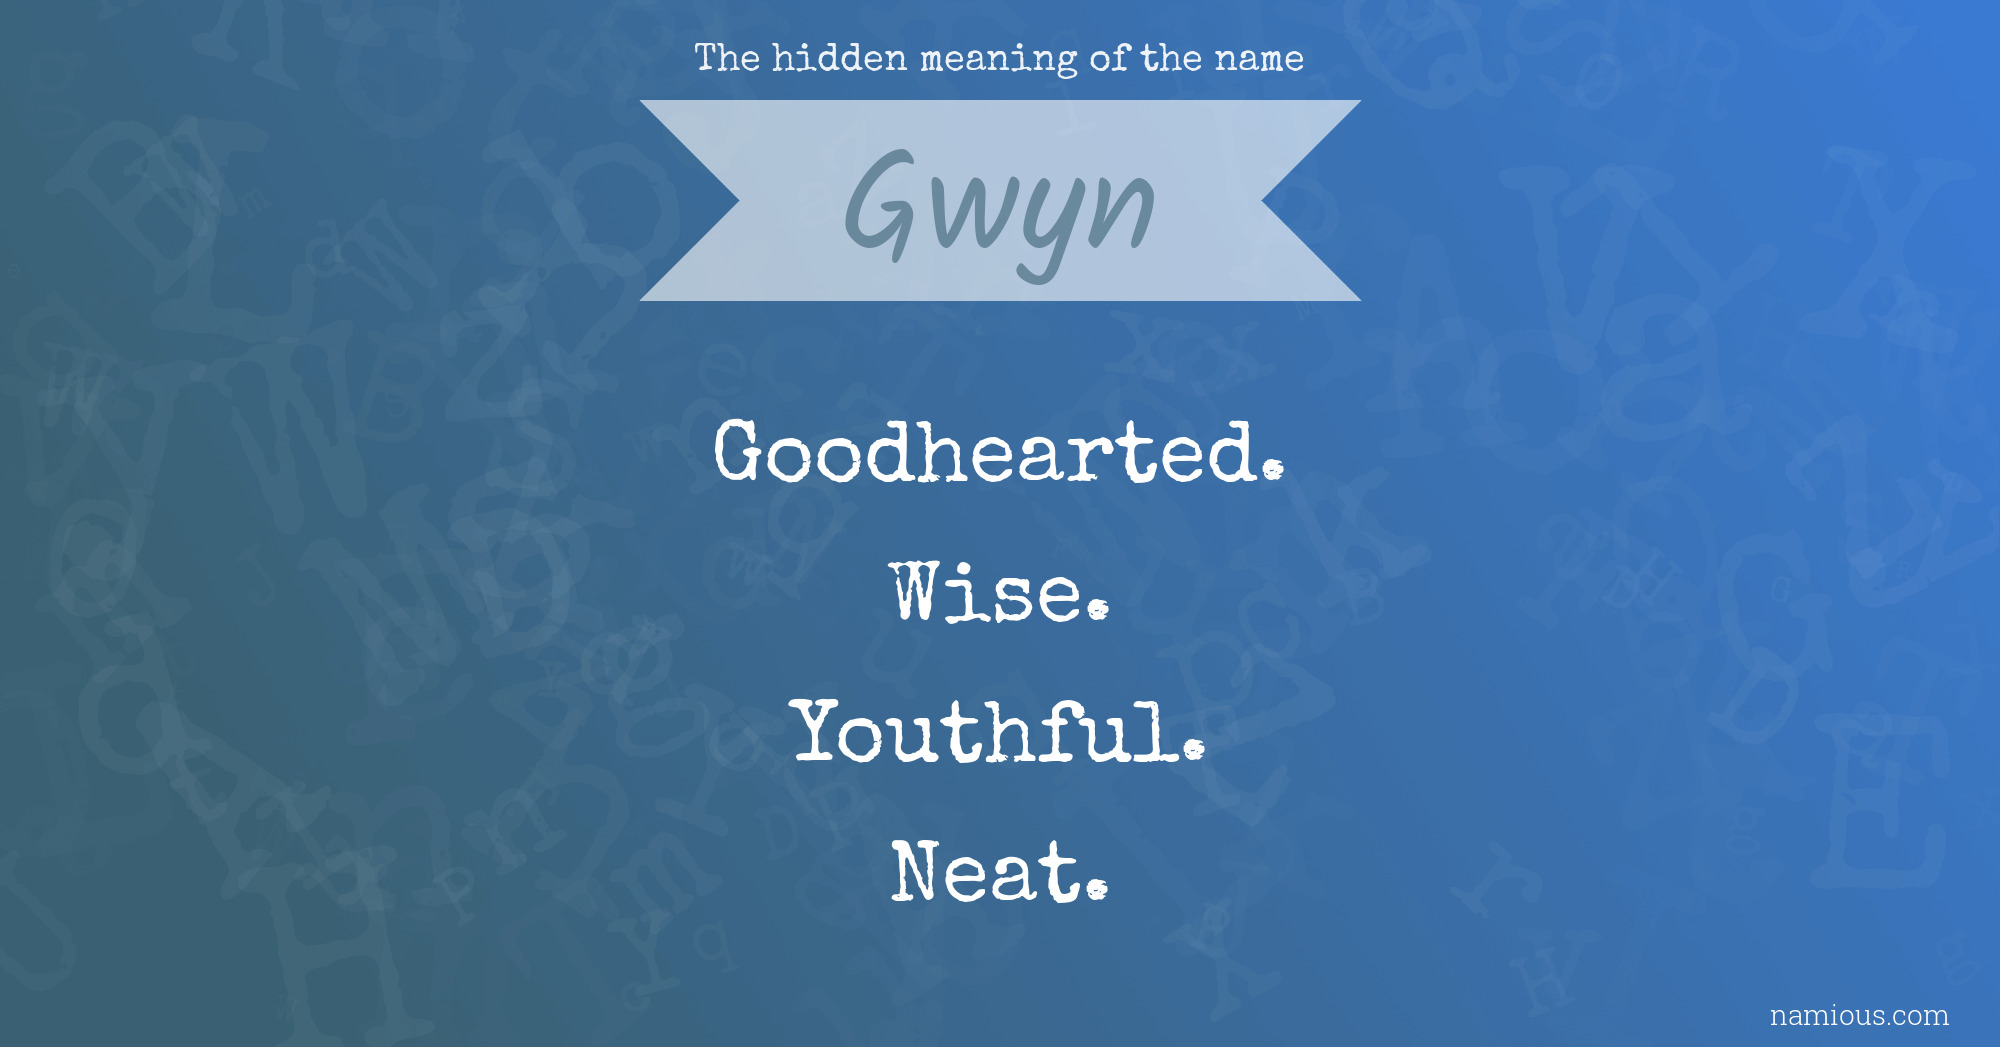 The hidden meaning of the name Gwyn